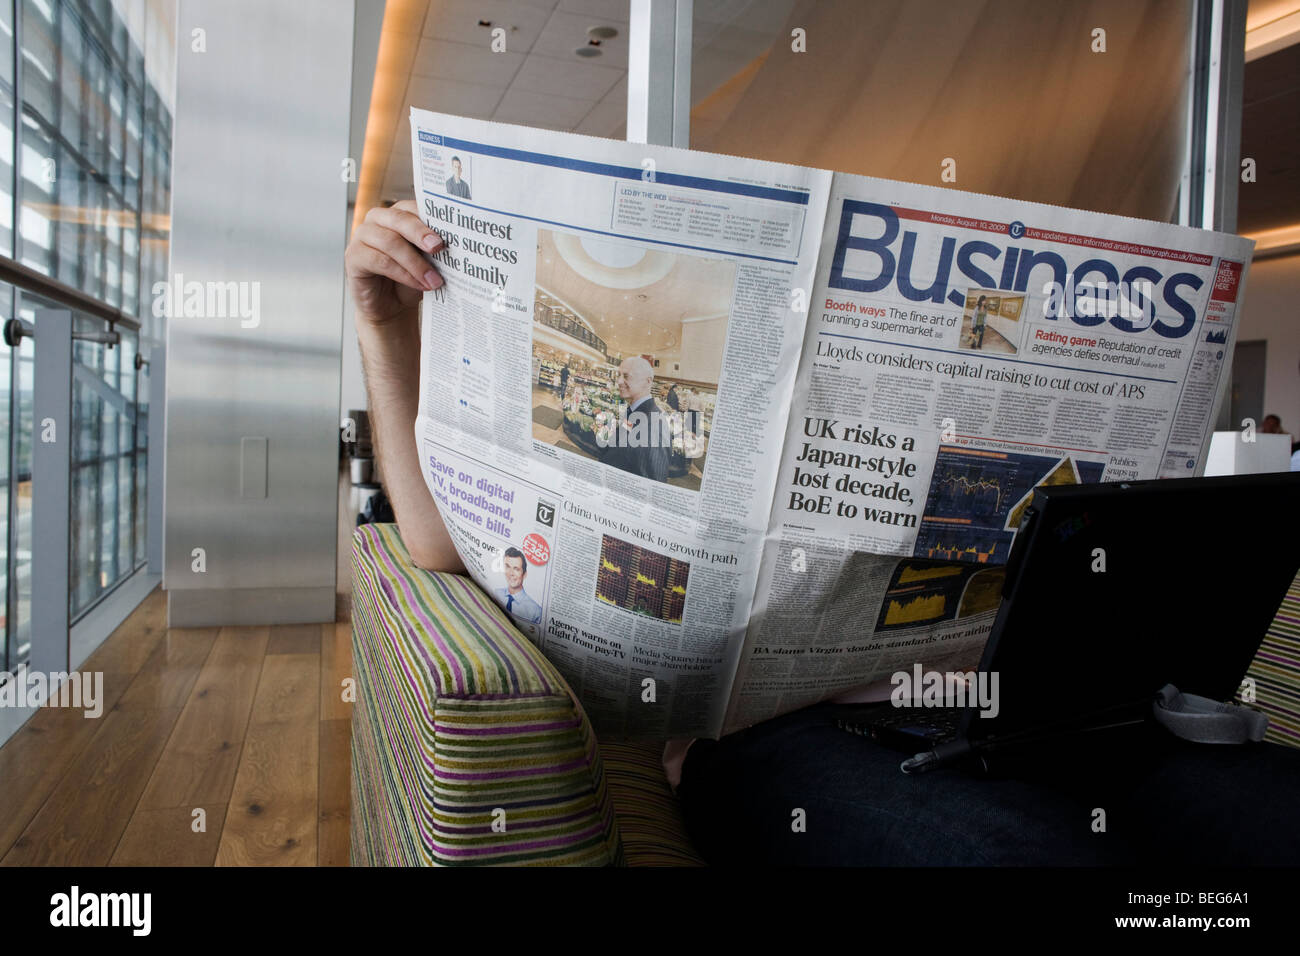 In the British Airways Galleries First lounge at Heathrow Airport's T5 a passenger reads the Business section of a broadsheet. Stock Photo